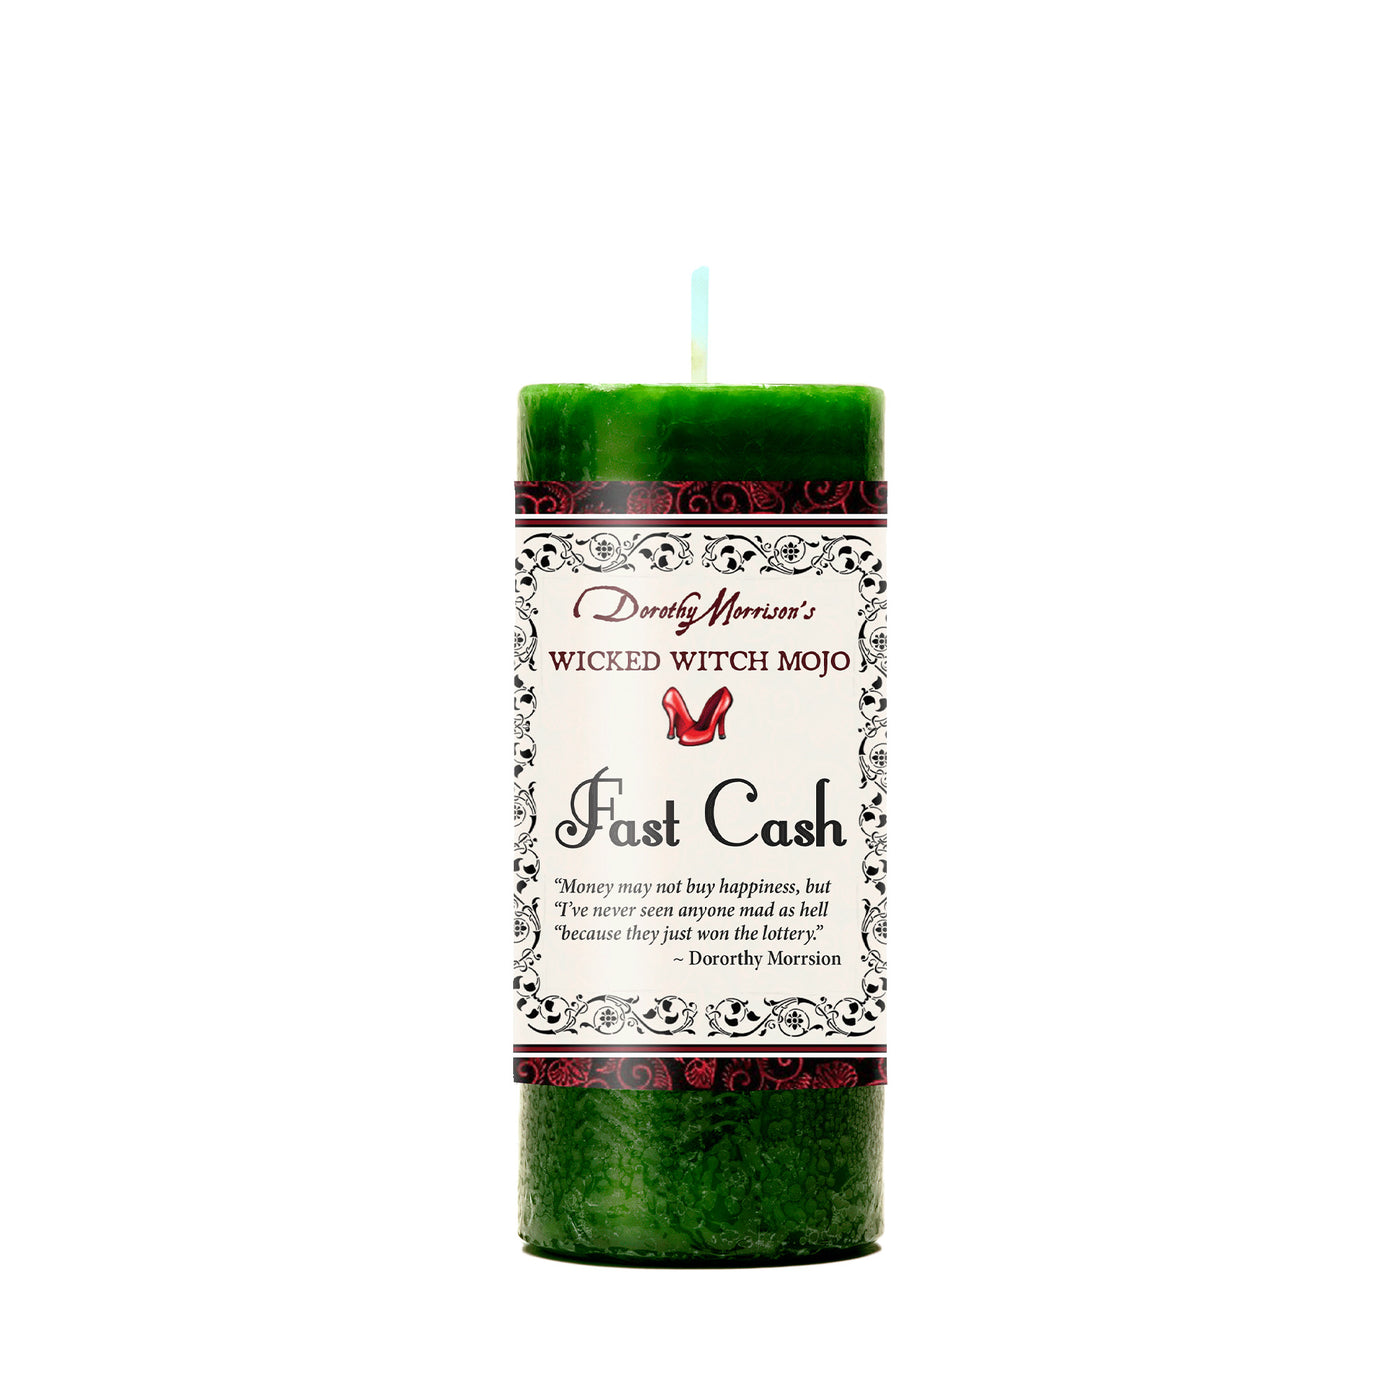 Coventry Creations and Dorothy Morrison’s Wicked Witch Mojo Fast Cash Green Candle